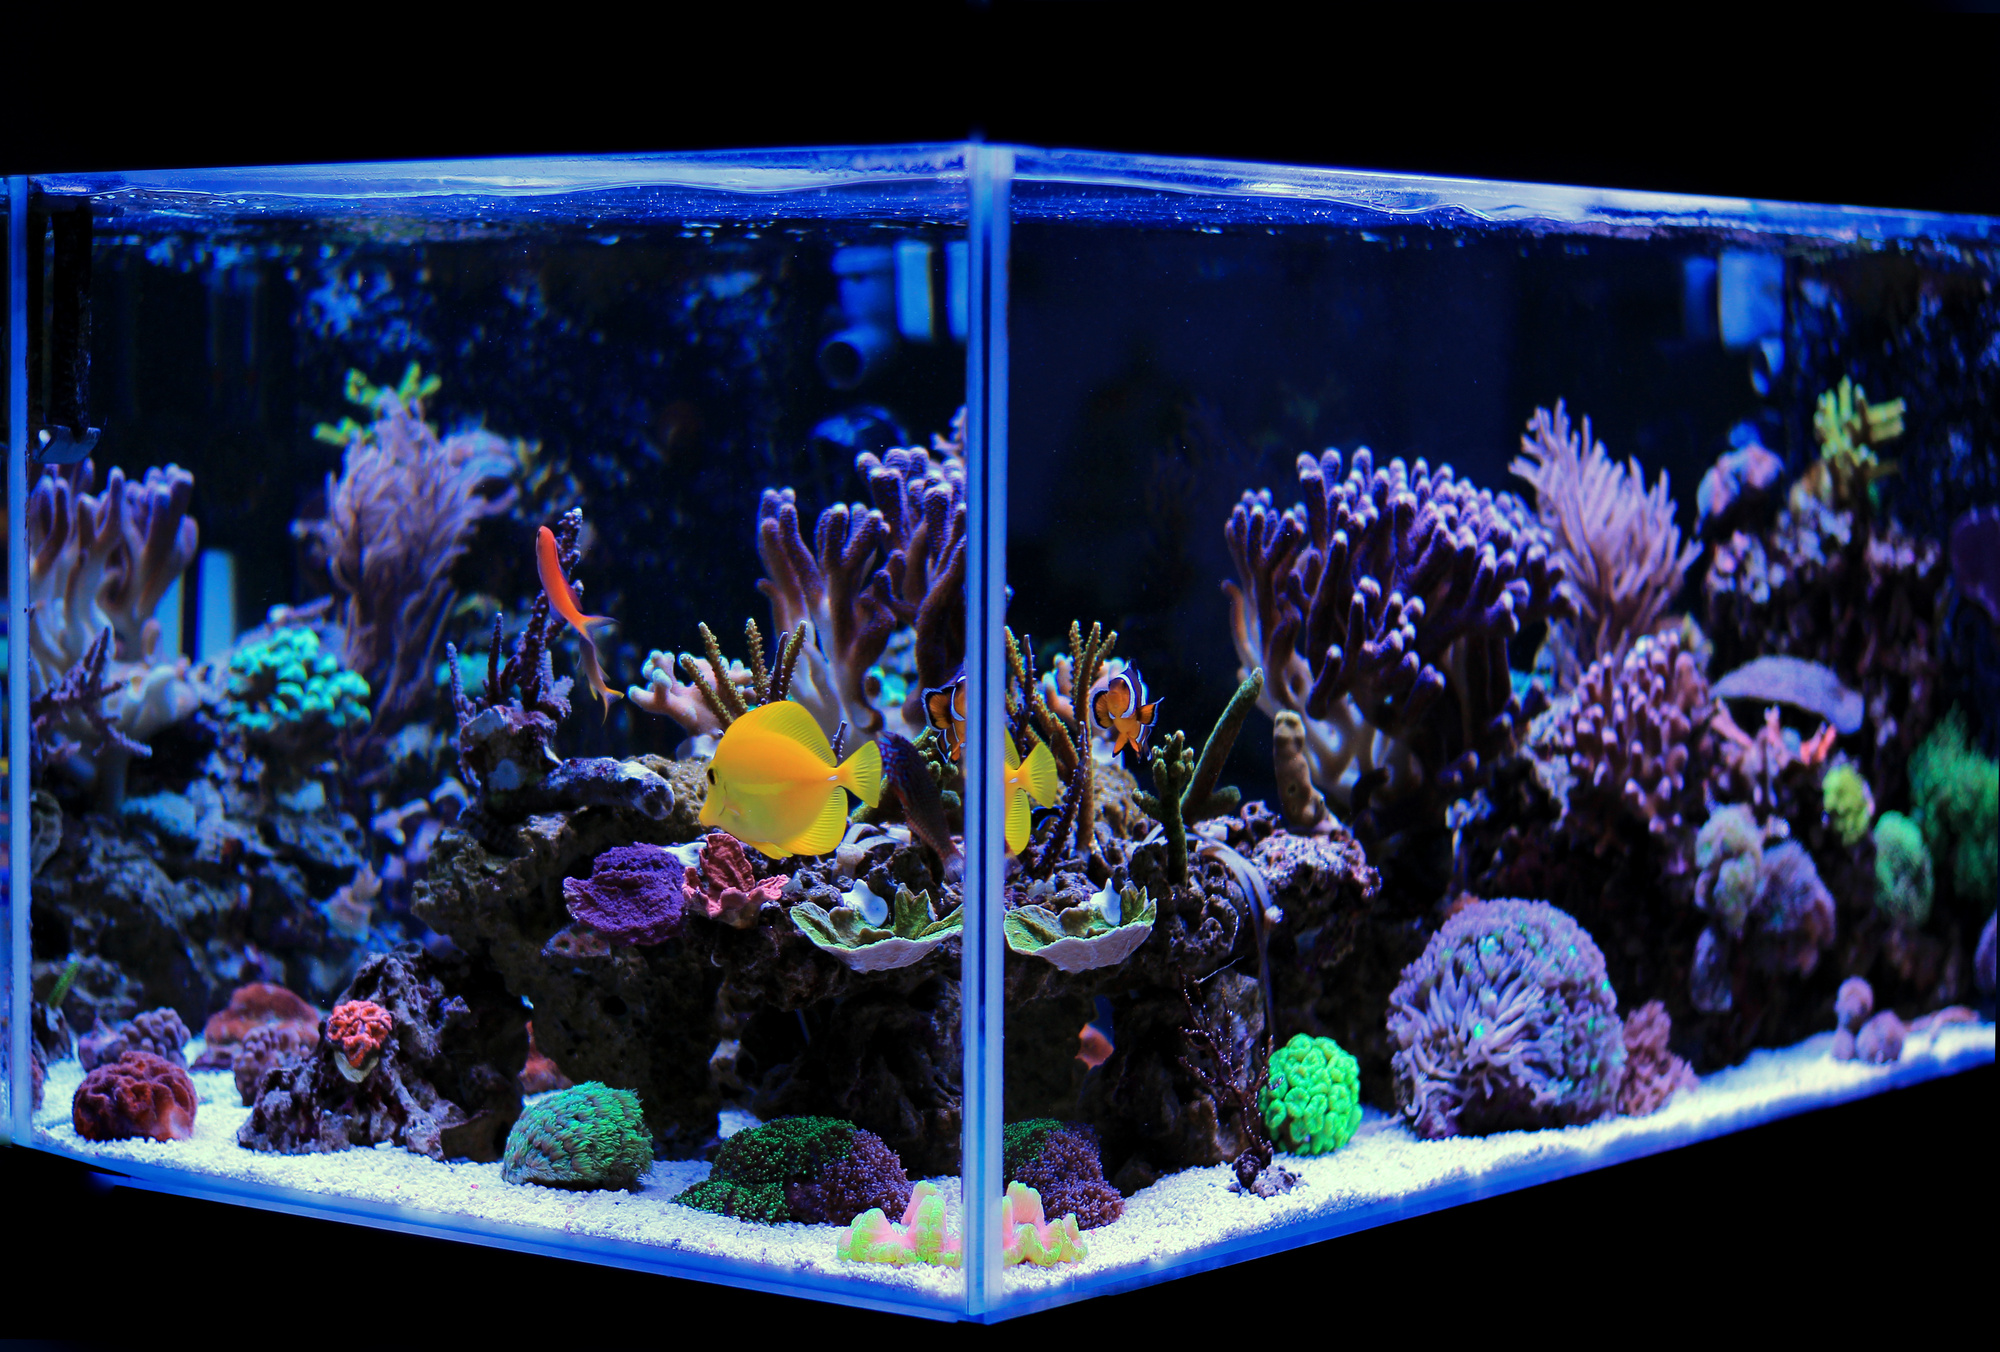 Building a reef aquarium can be an exciting process, but you should know what to buy before starting. Learn how to choose reef aquarium supplies here!